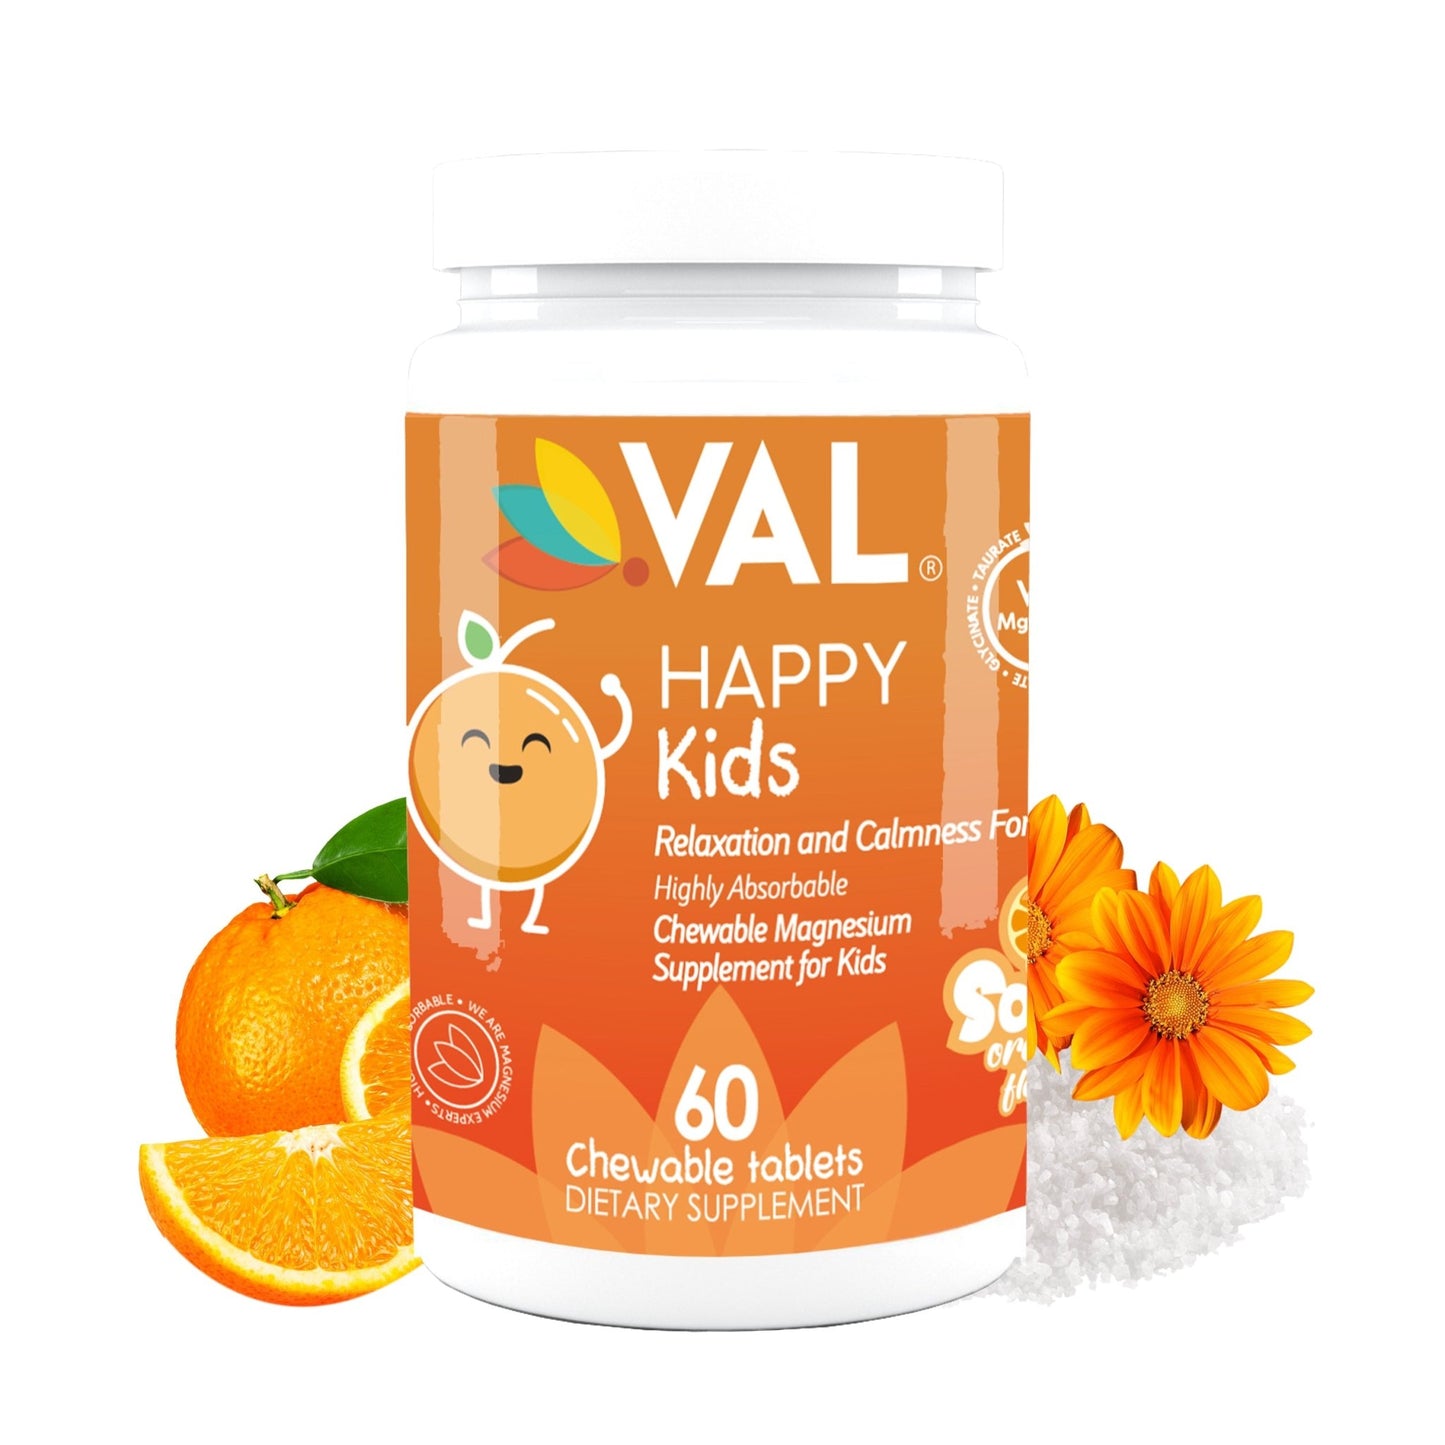 VAL Happy Kids Chewable Magnesium for Kids Relaxation and Calm Formula - 60 Chewable Tablets - Val Supplements